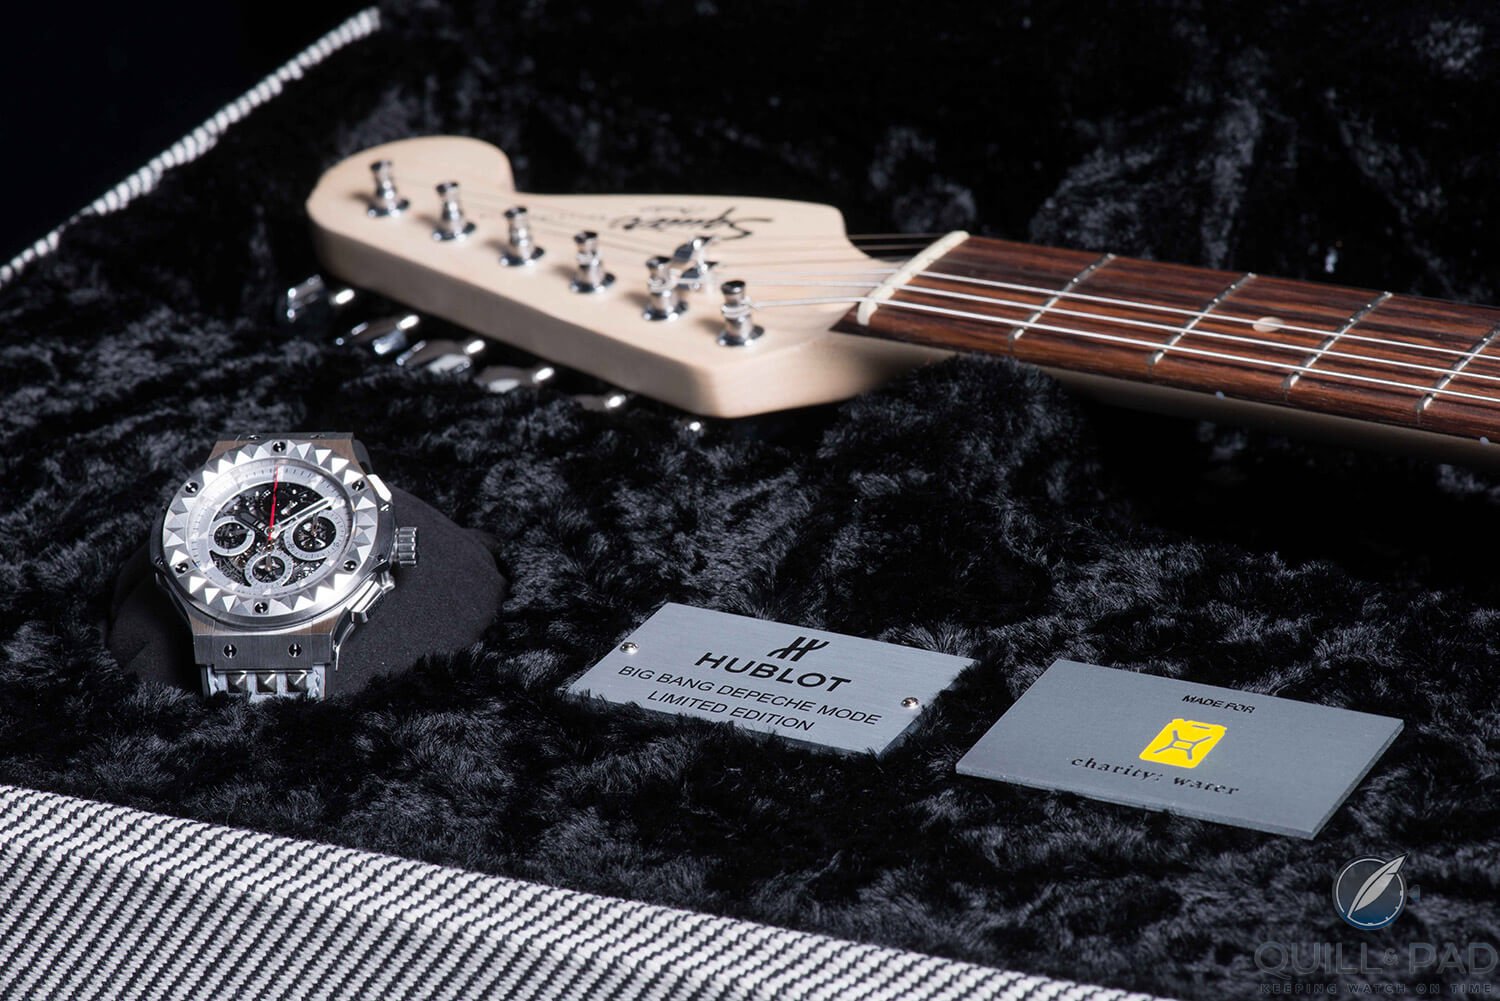 The Hublot Depeche Mode chronograph, a limited edition of ten that came with a Fender guitar in 2014